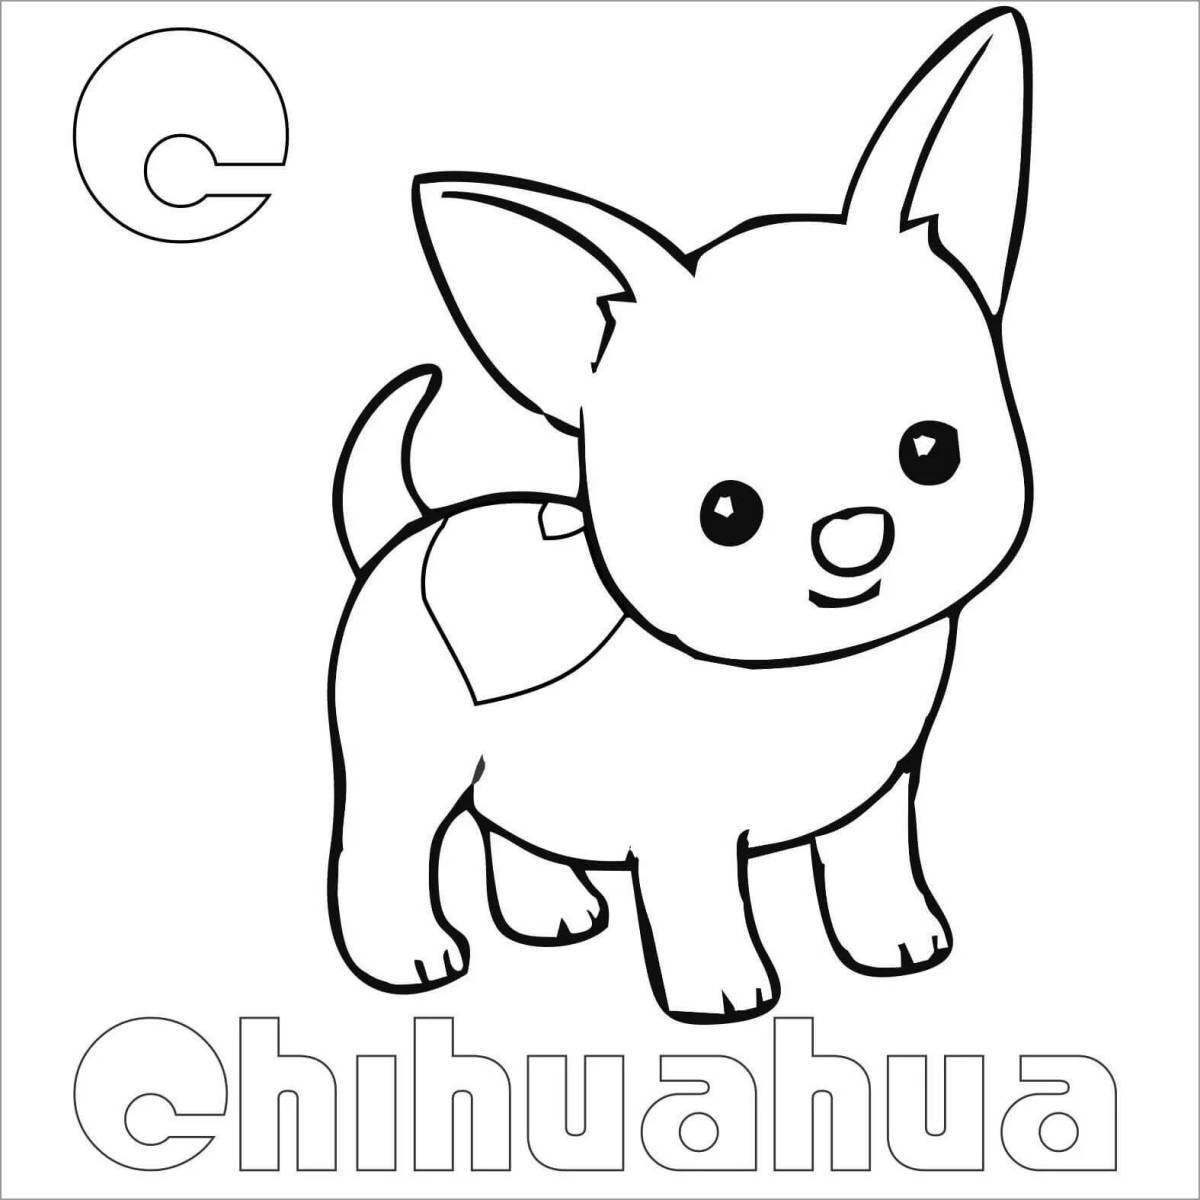 A fun chihuahua coloring book for kids